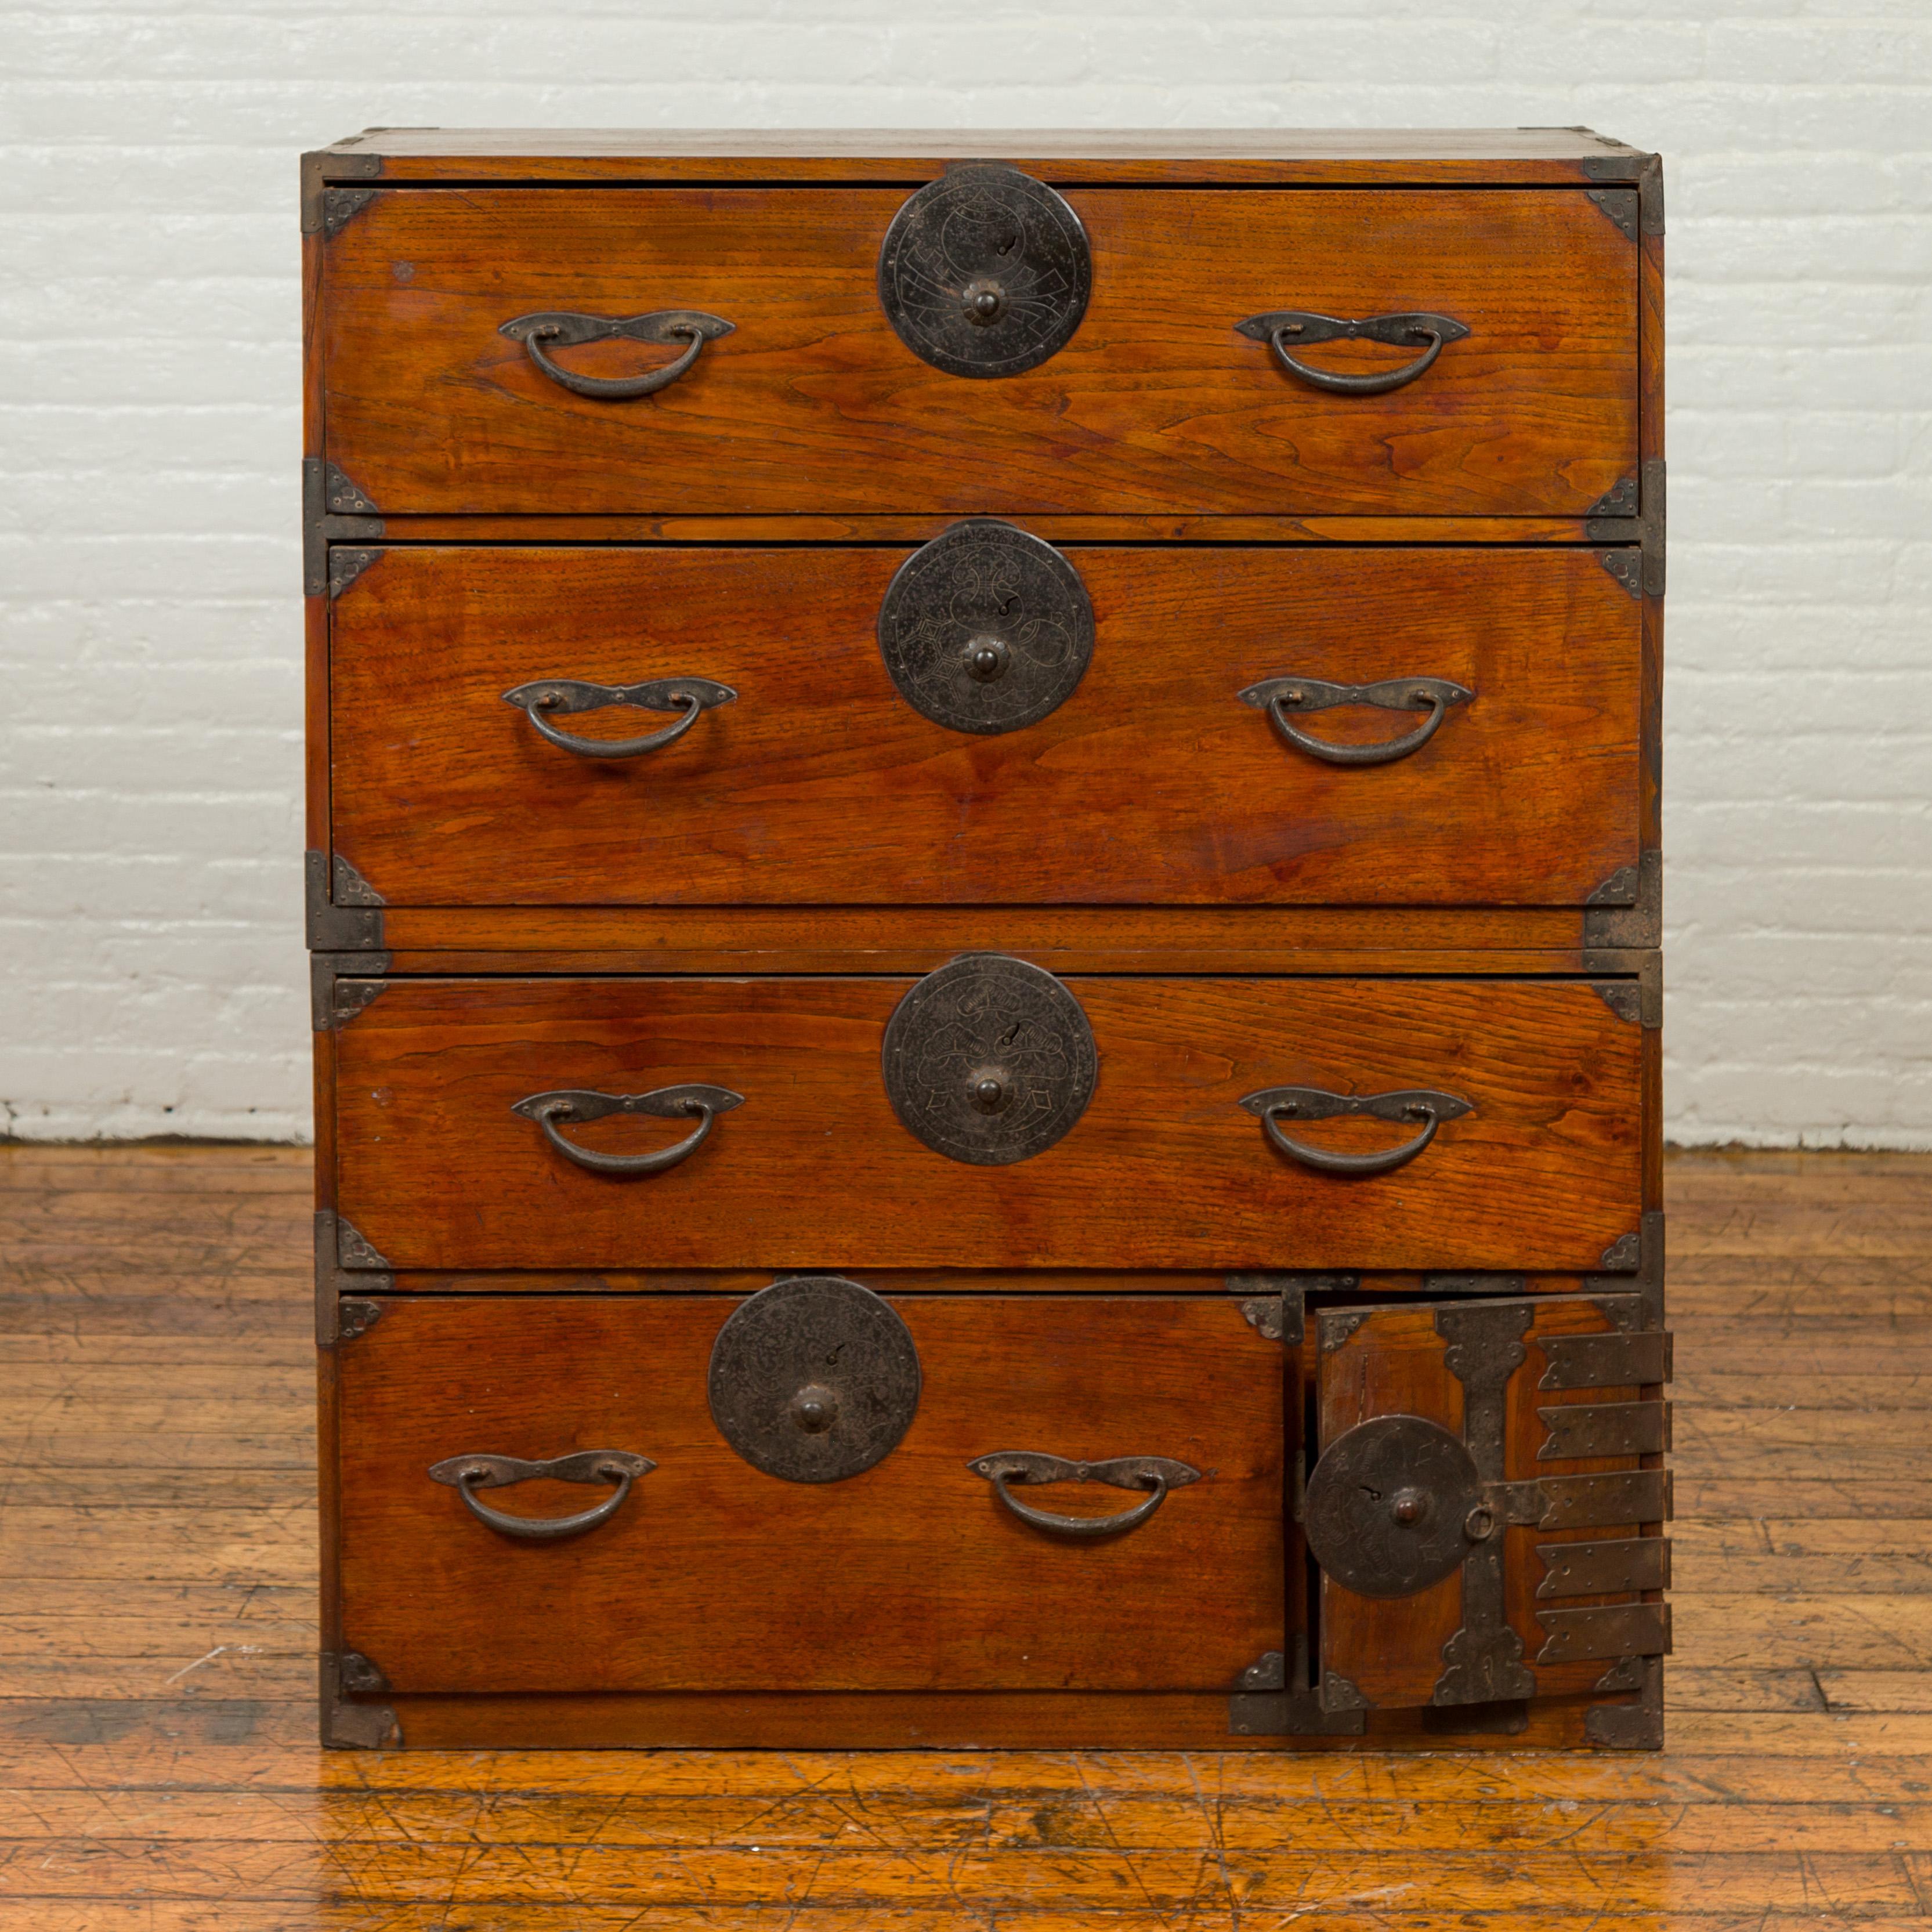 A Japanese Meiji period keyaki wood tansu clothing chest in the Sendai Isho-dansu style, with hand-cut iron hardware, drawers and safe. Born during the 19th century, this wooden tansu is a fine example of Japan's traditional mobile cabinetry.